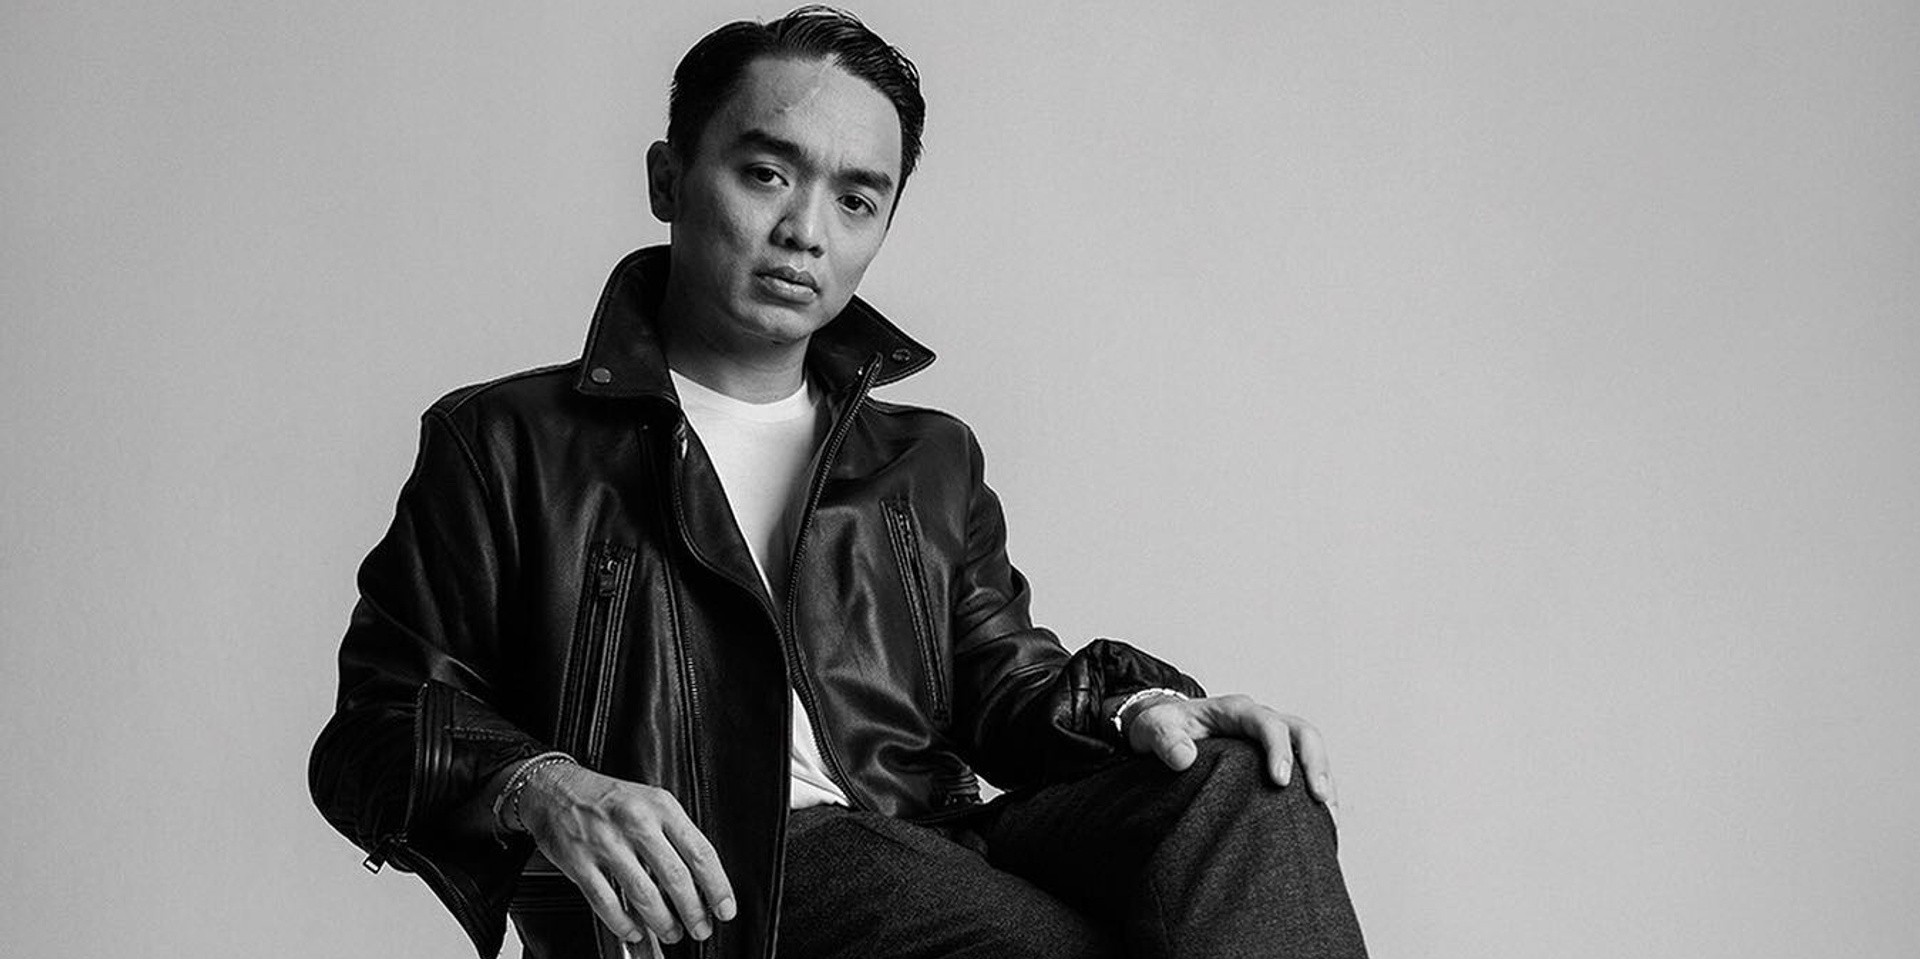 "I try to recreate my thoughts and feelings during meditation and healing through my music": An interview with Dipha Barus